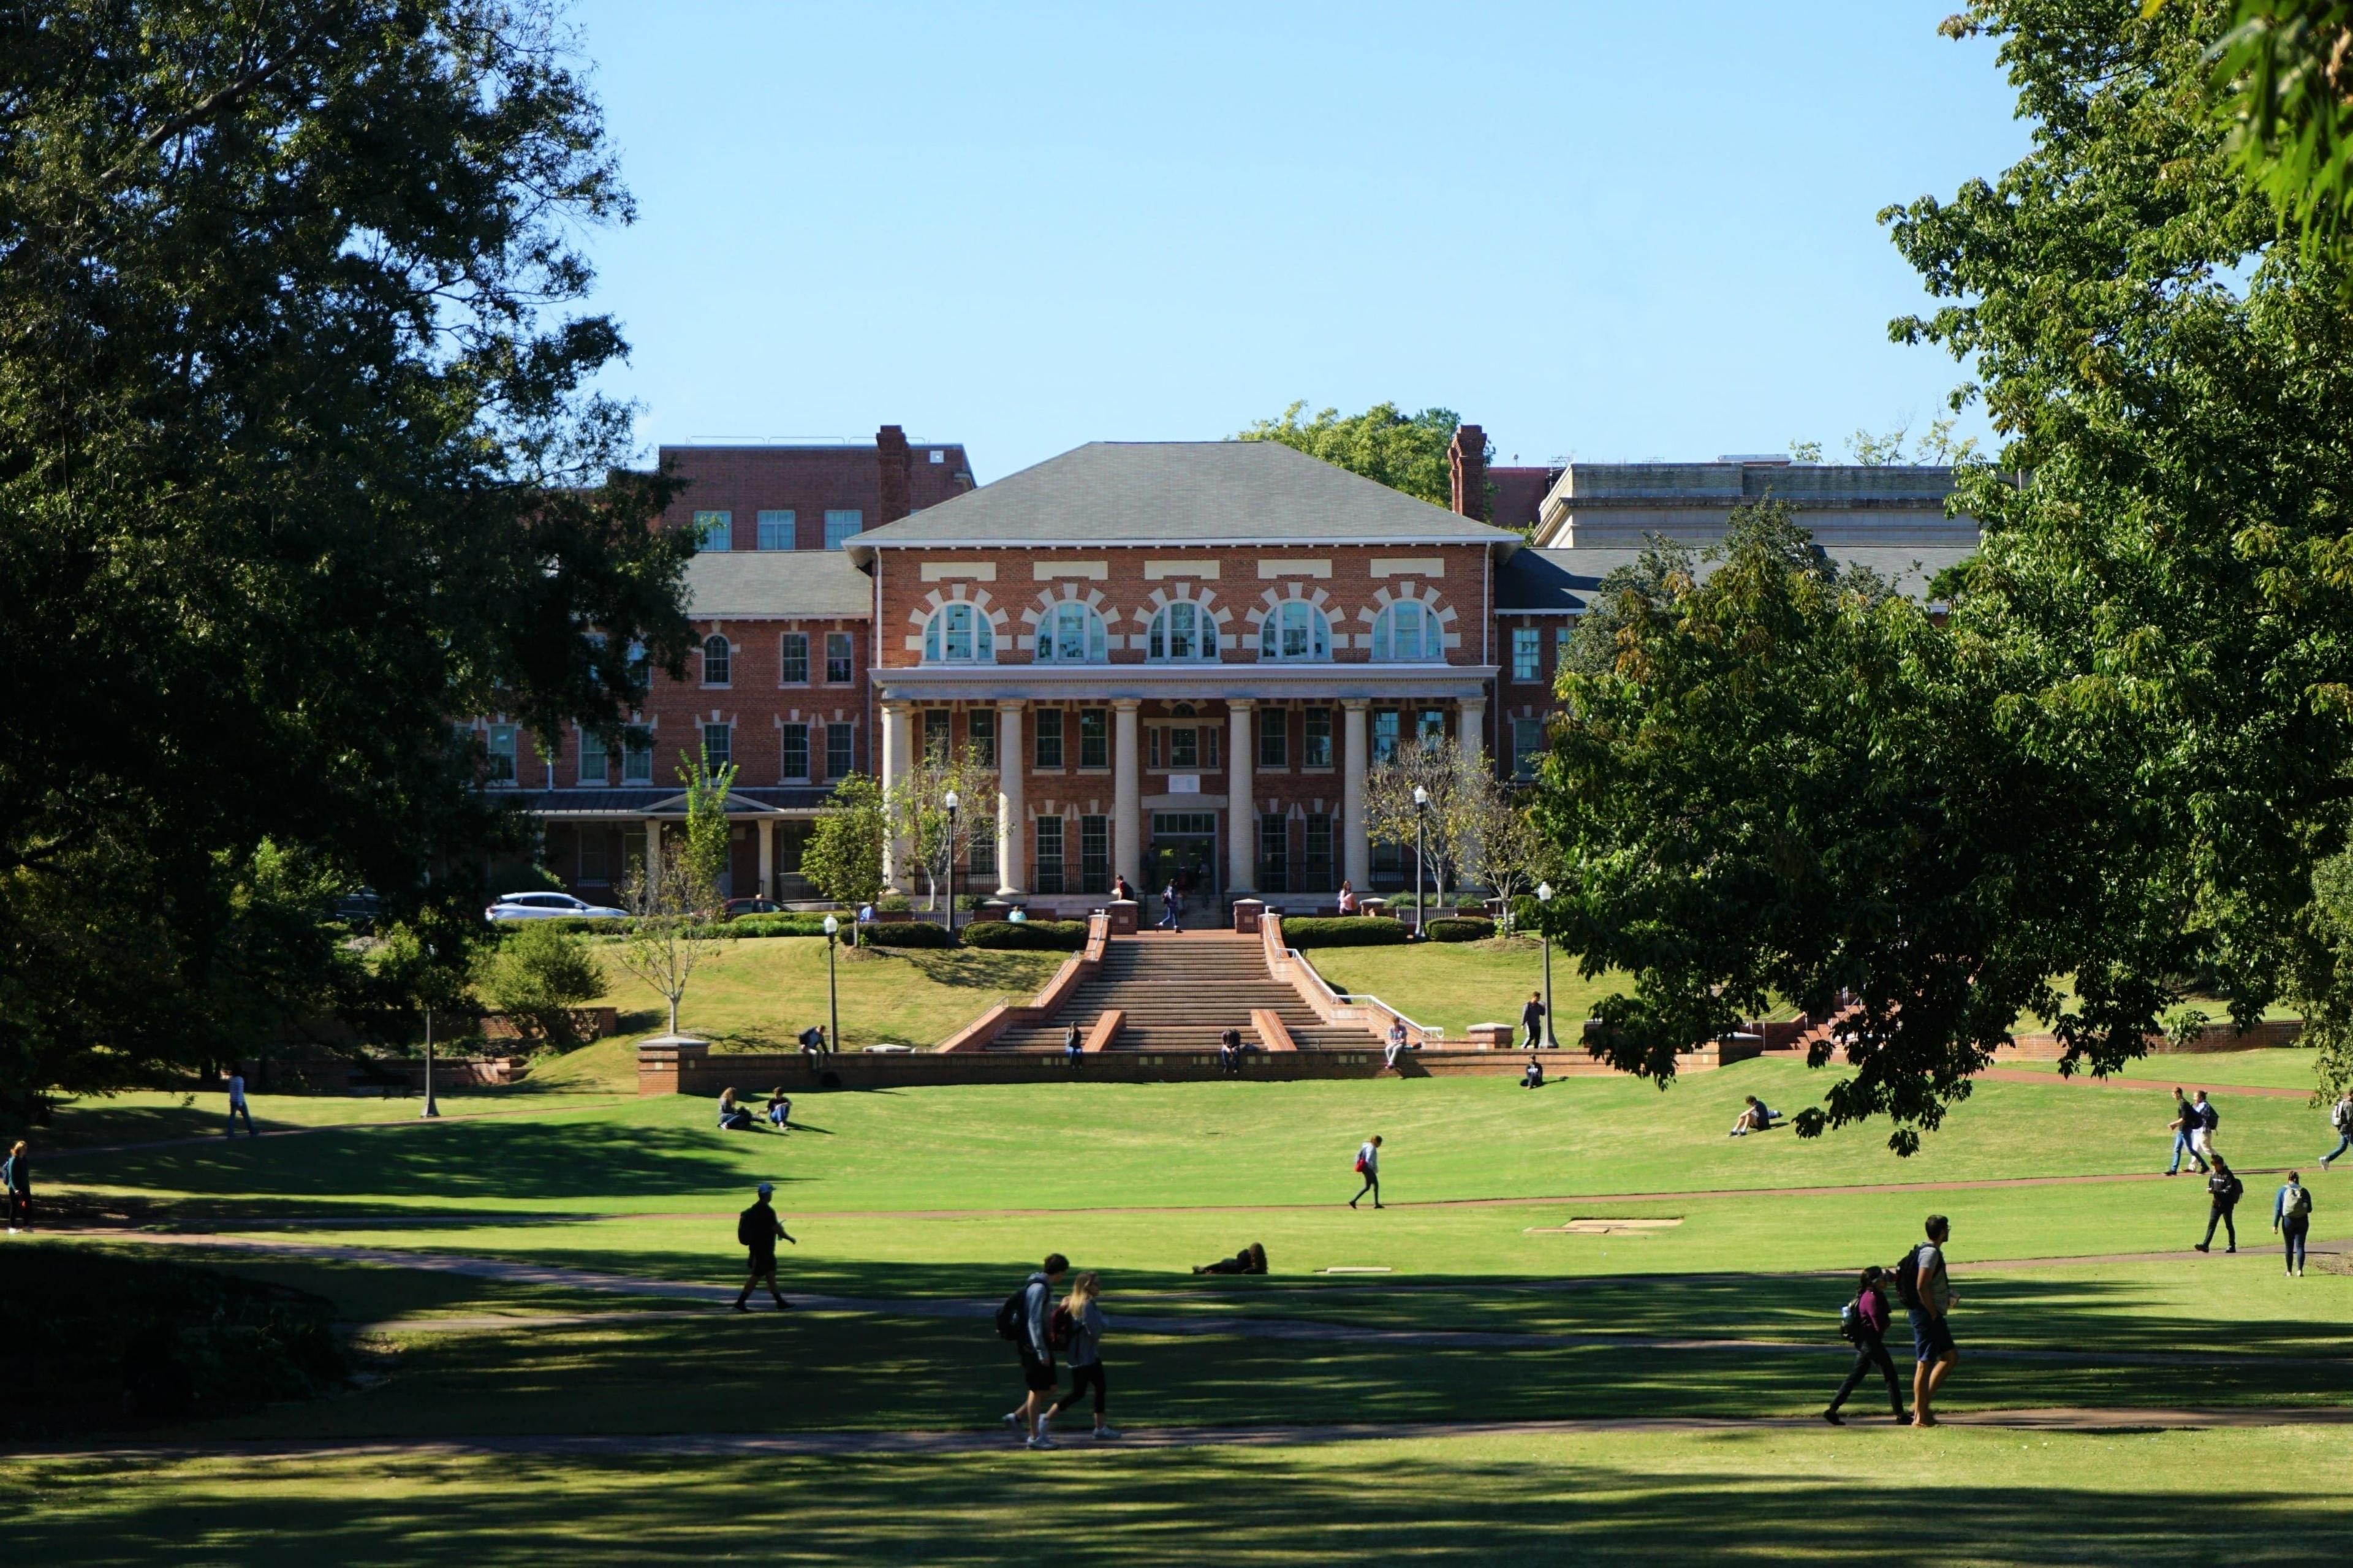 Students walking on the lawn of a college 